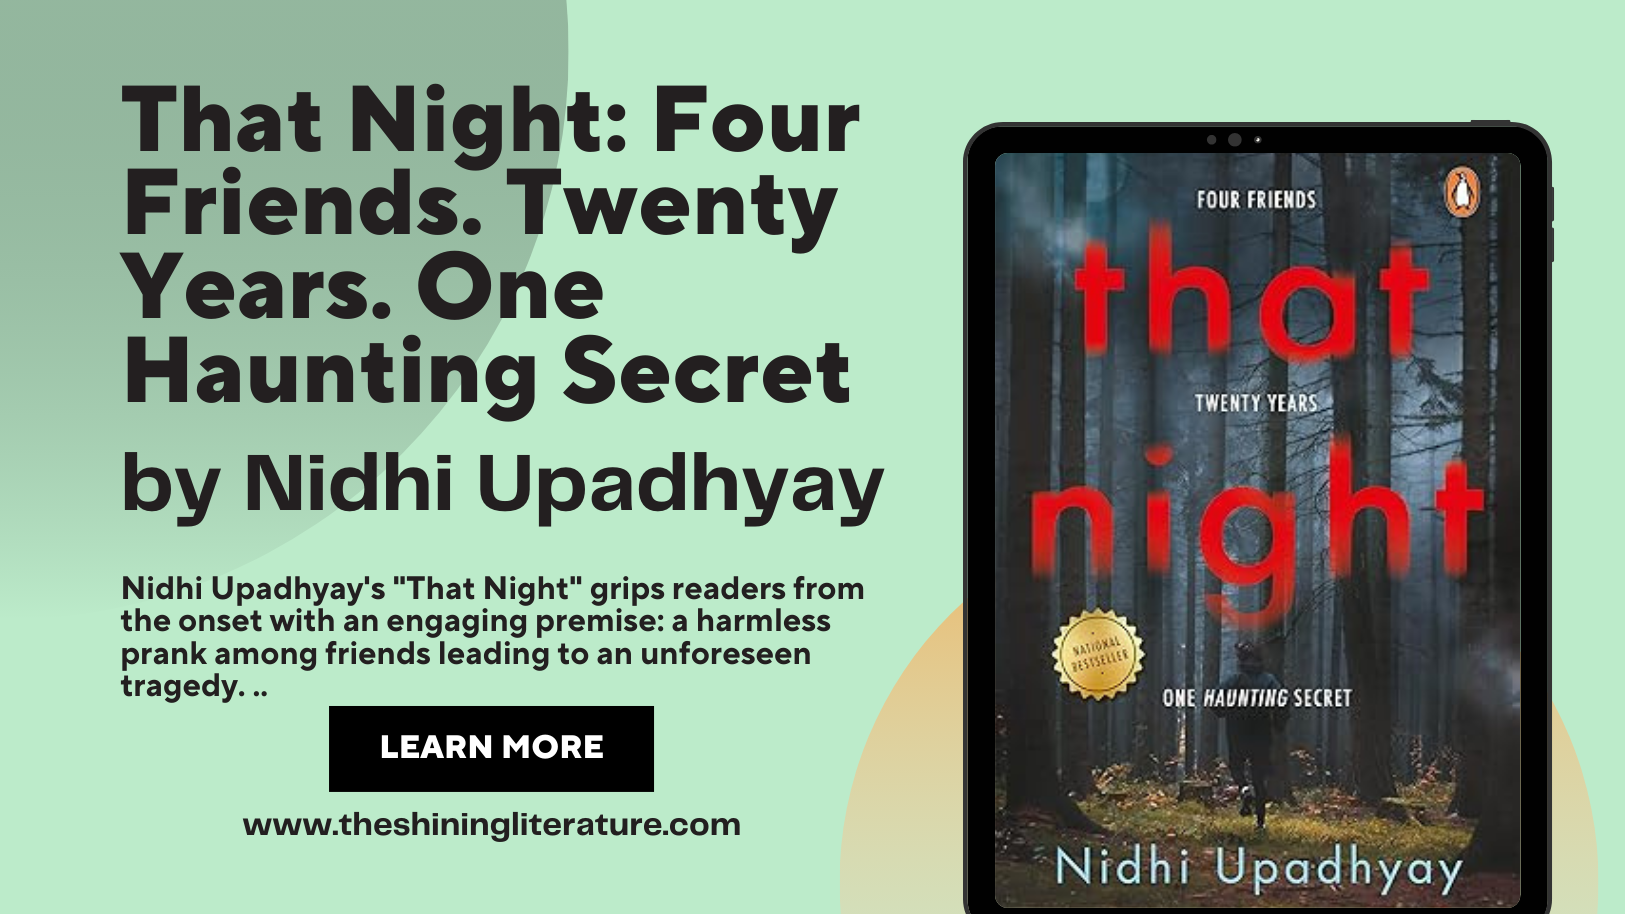 Book Review - That Night by Nidhi Upadhyay